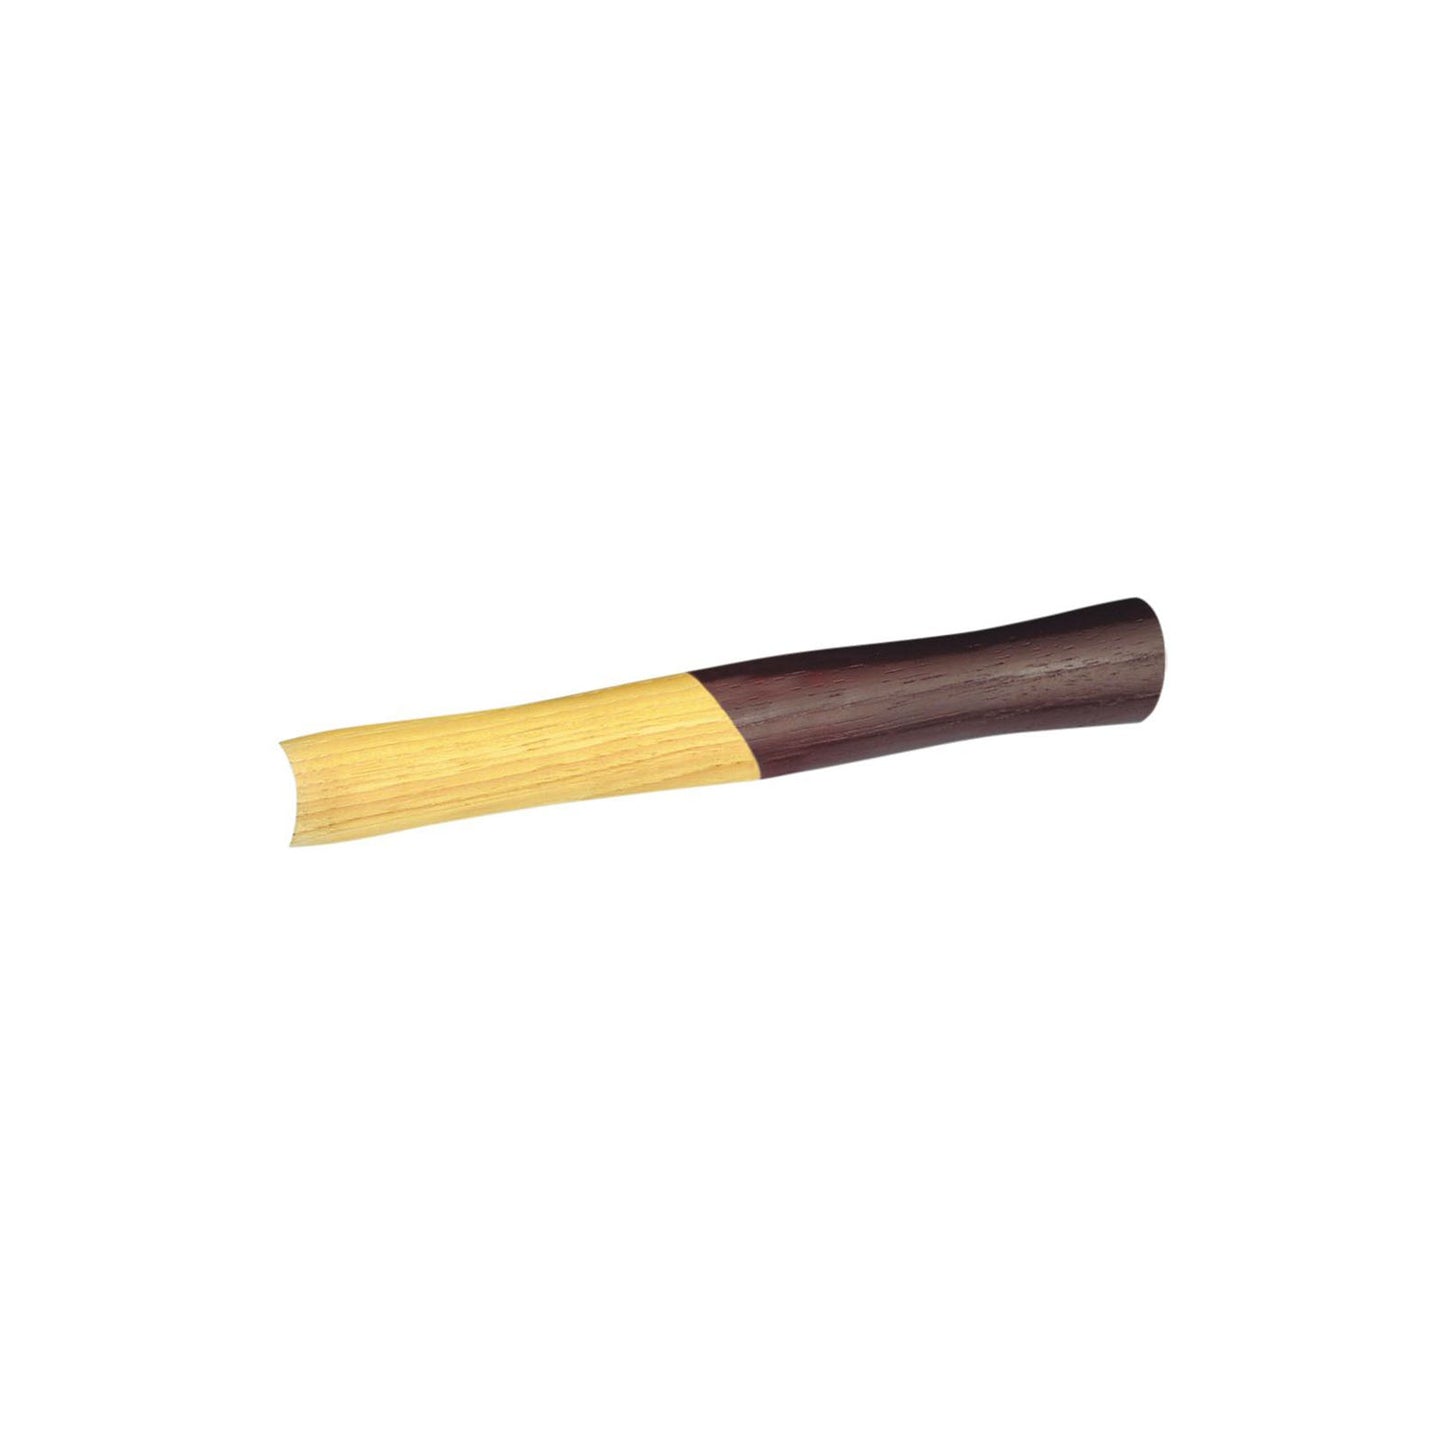 GEDORE E 248 H-80 - Walnut replacement handle 80cm (8740190)